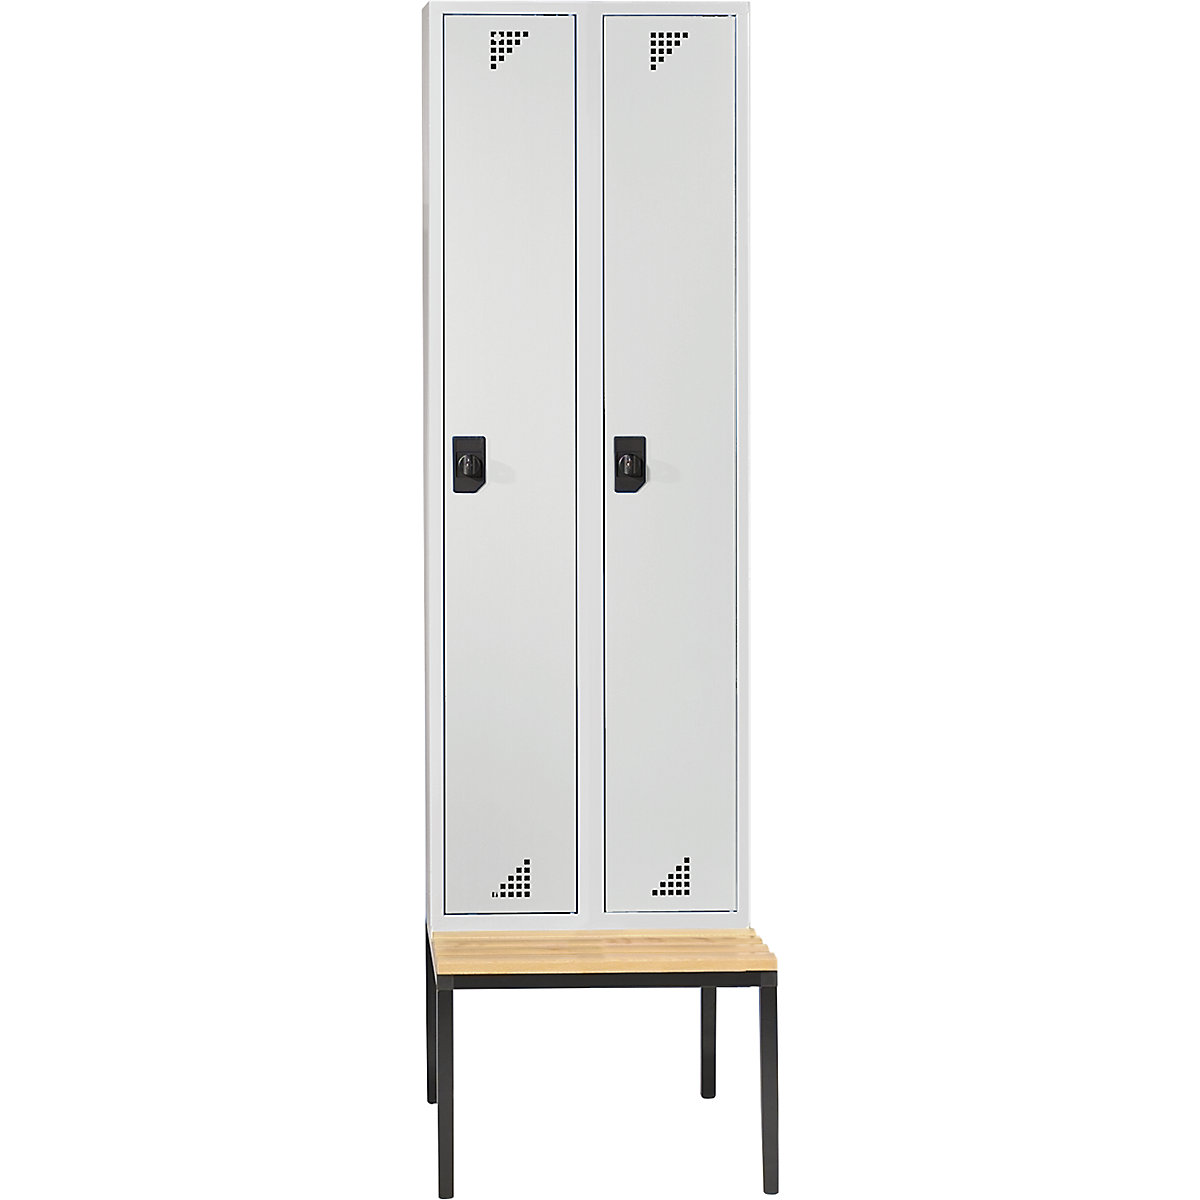 Multi-purpose cupboard and cloakroom locker – eurokraft pro, with seat bench, 2 compartments, width 600 mm, light grey doors-6